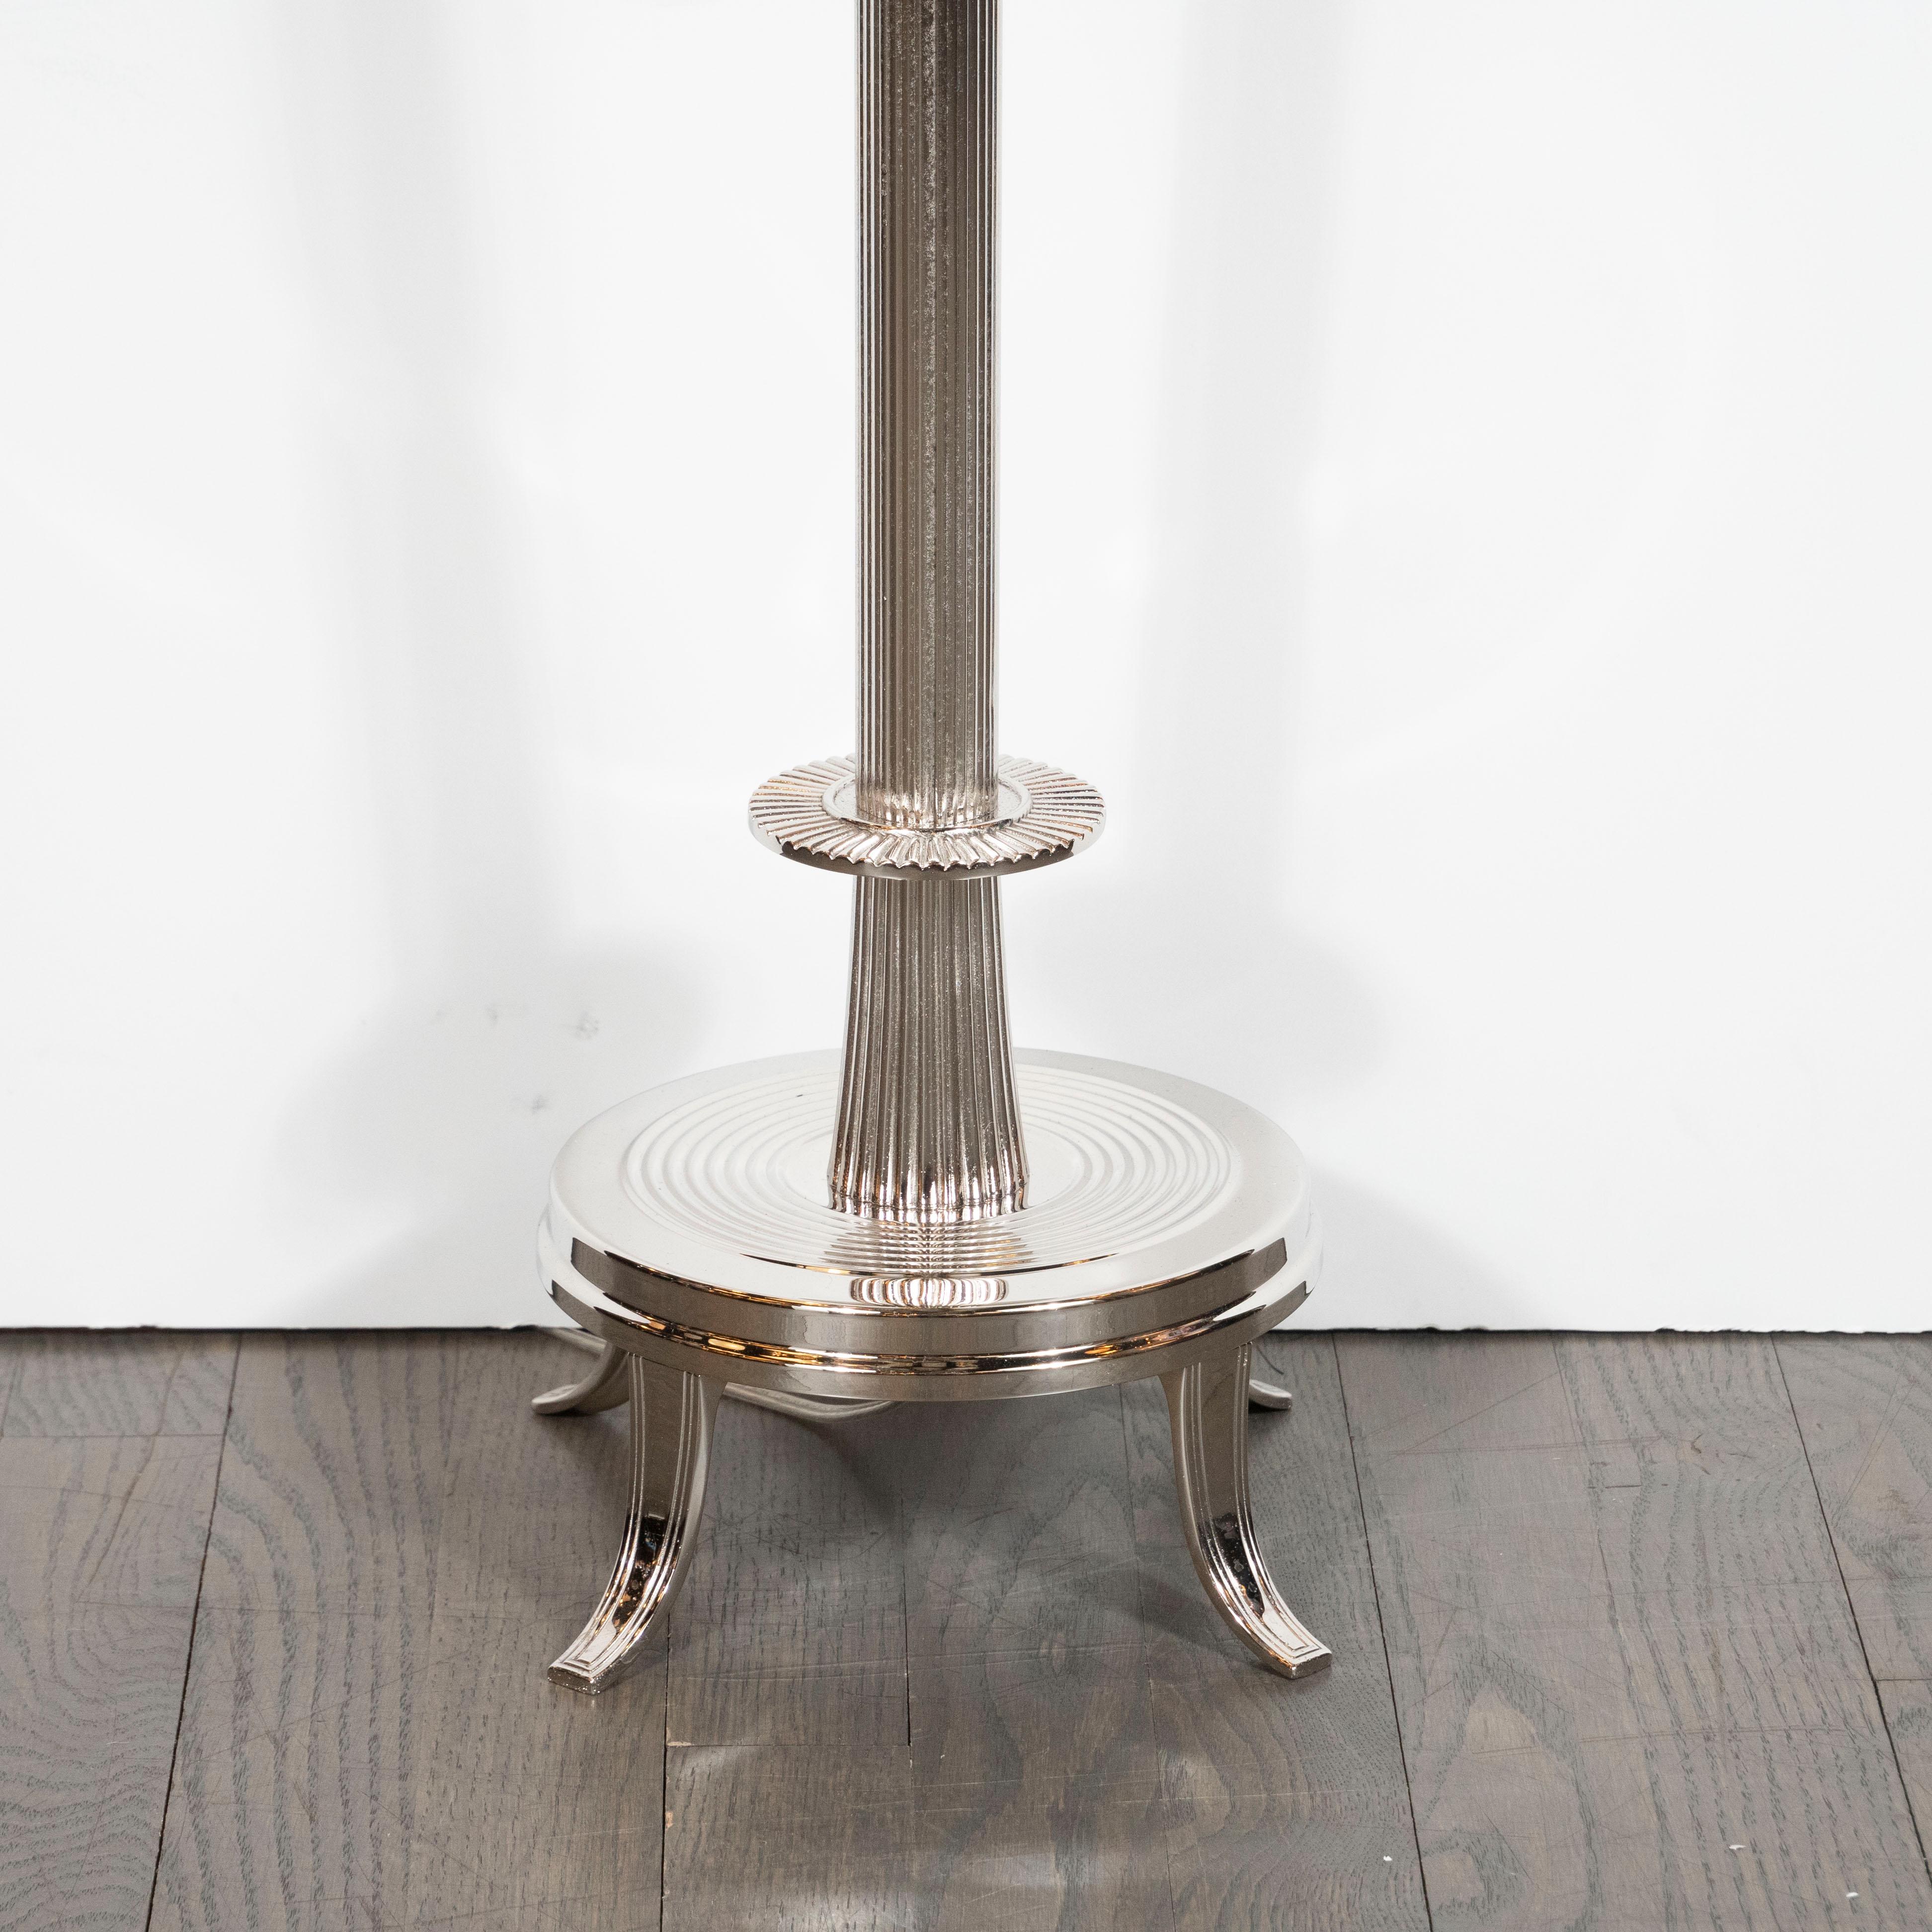 American Mid-Century Modern Polished Nickel Urn Form Torchère by Tommi Parzinger